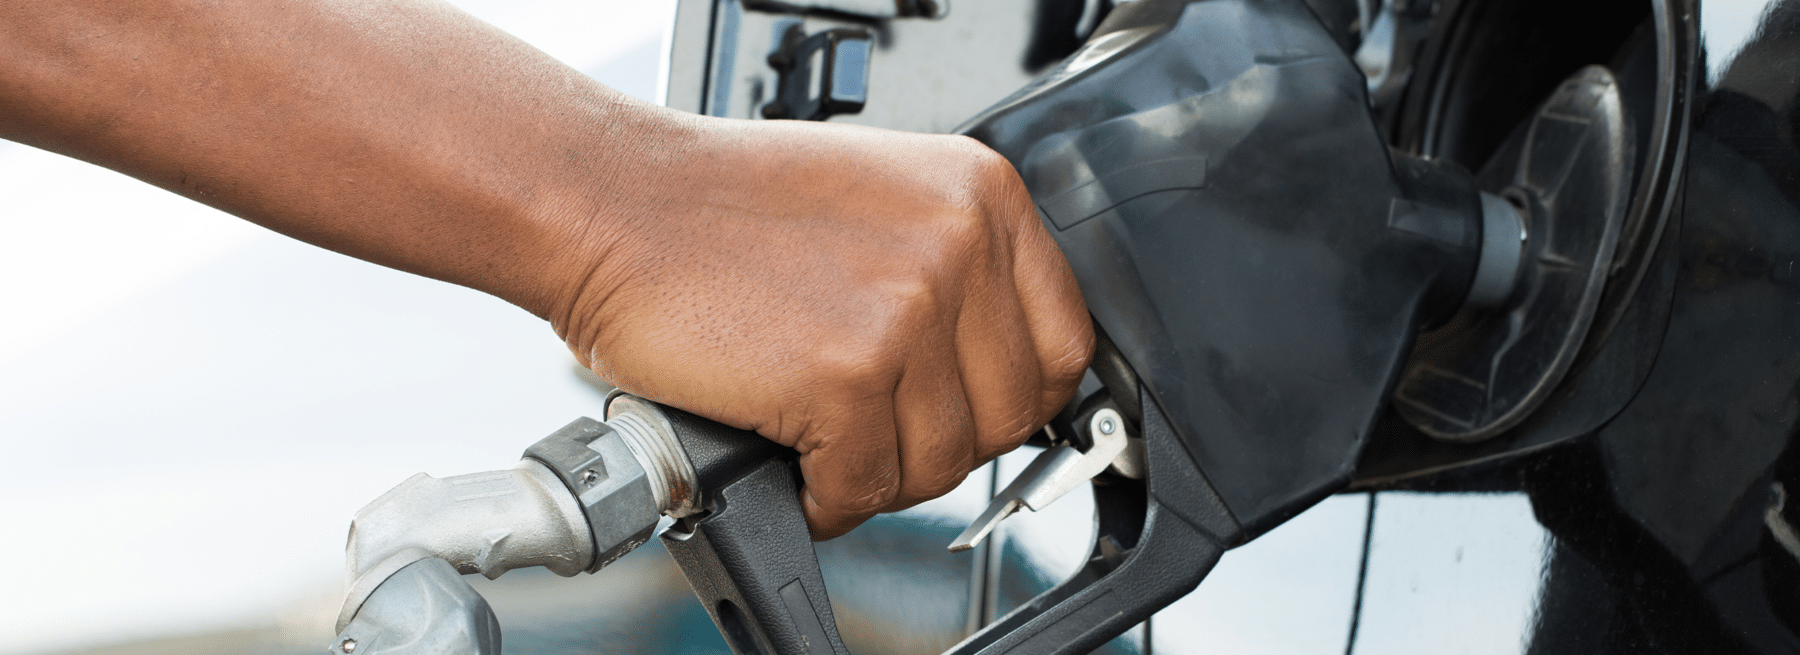 Fuel Theft is on The Rise